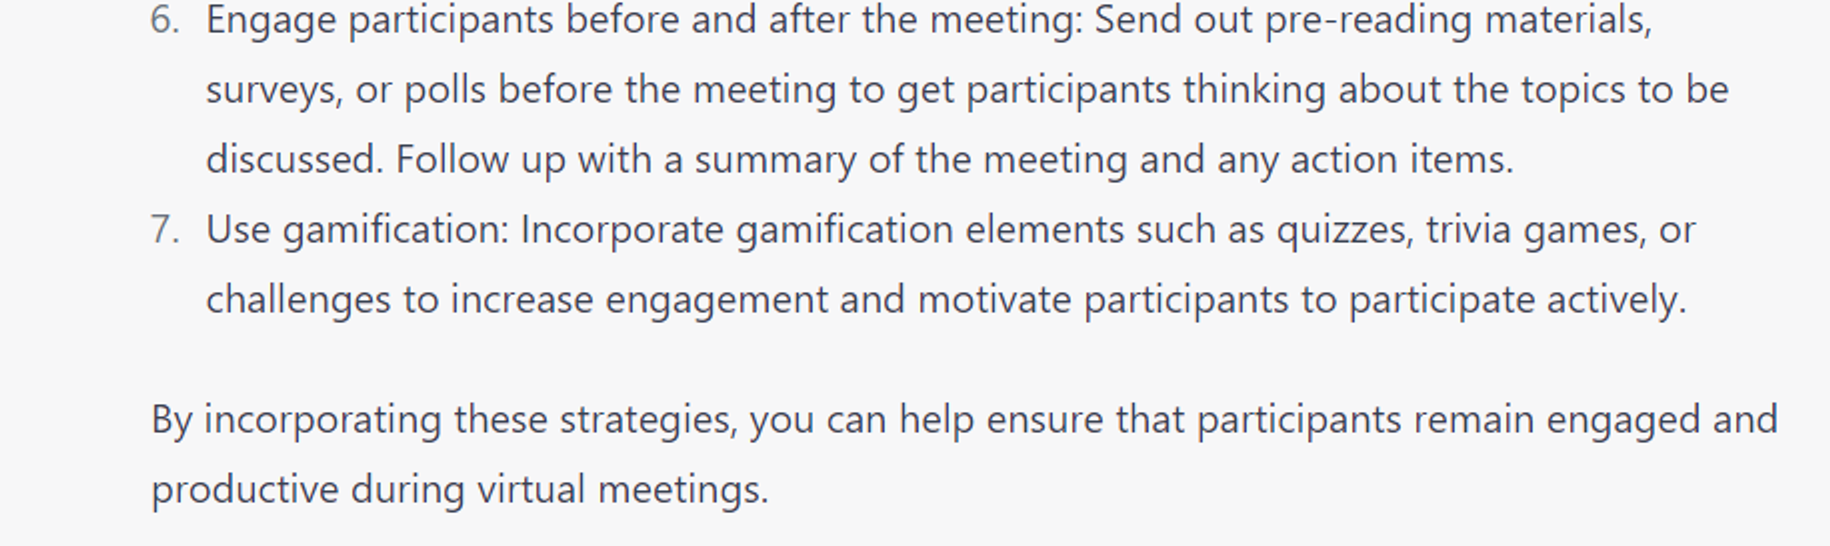  7 Innovative ChatGPT Prompts: Suggest virtual meeting etiquette